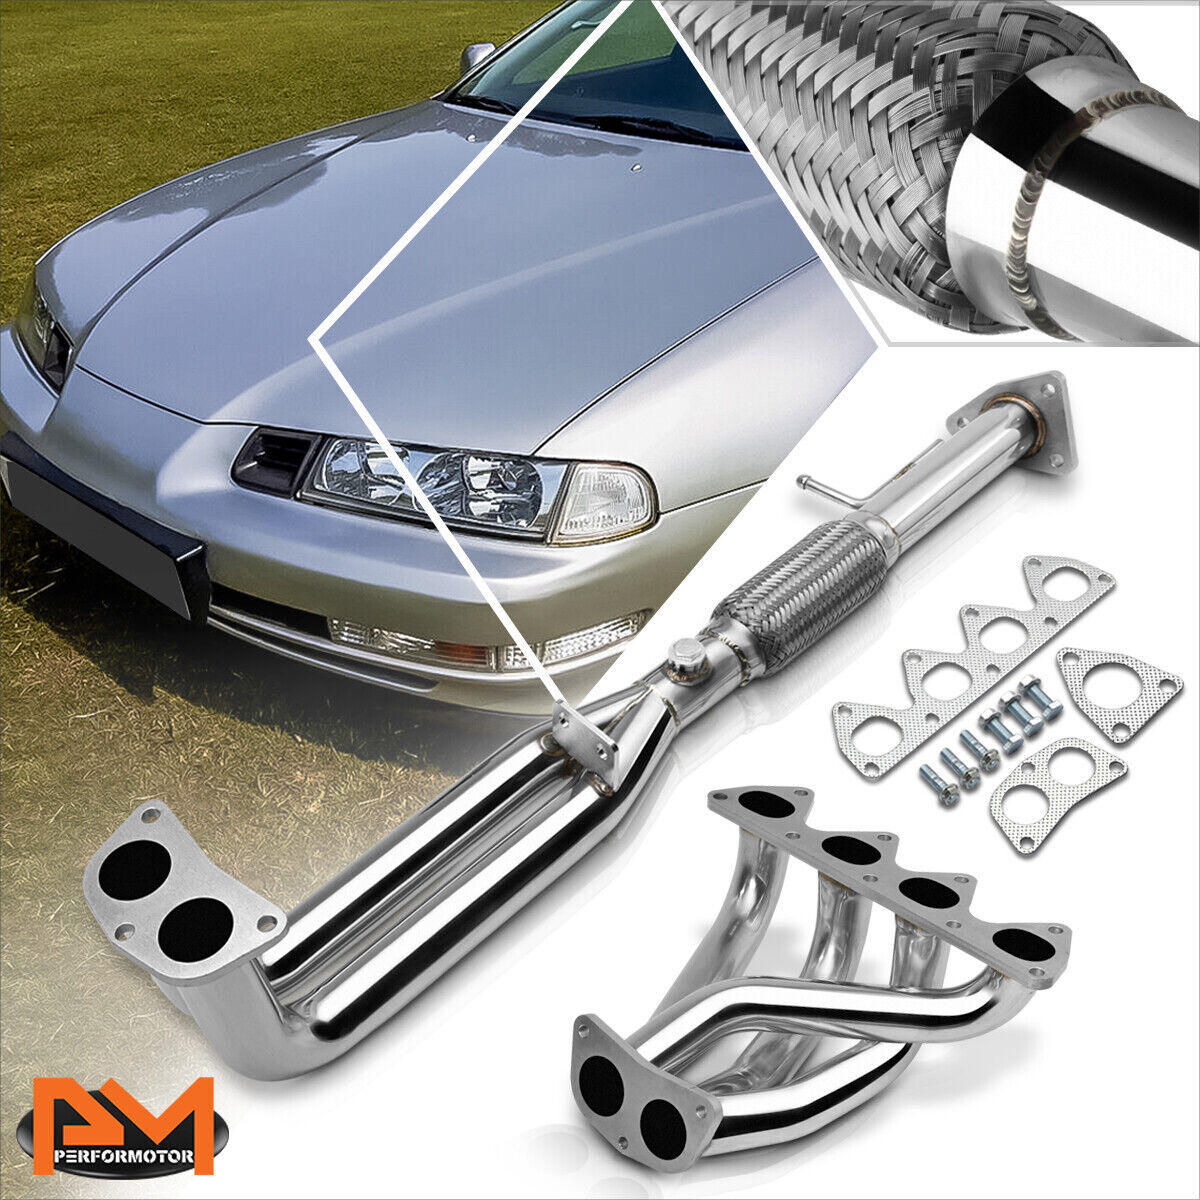 For 92-96 Honda Prelude VTEC 2.2L 4CYL Stainless Steel Exhaust Header Manifold